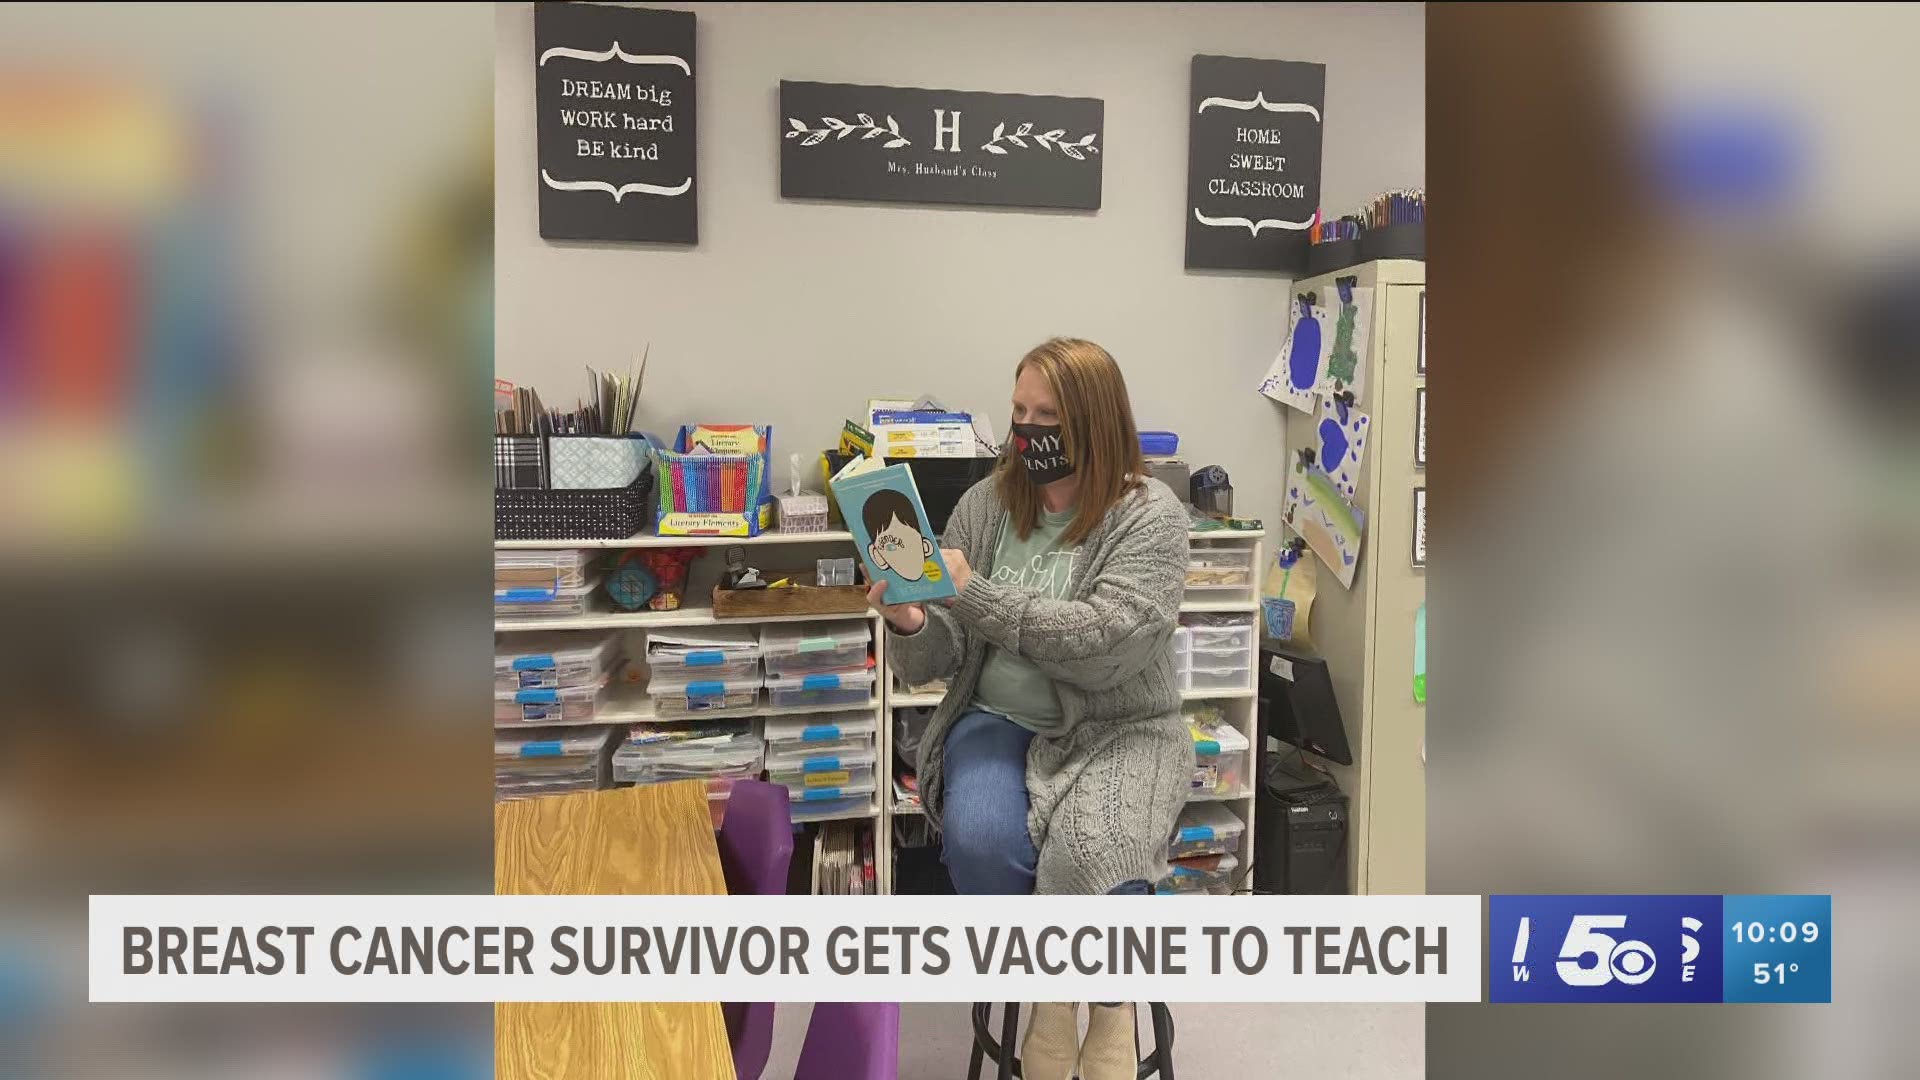 When the pandemic began, Hollie Husband and her family had to decide whether she would continue working in the classroom because she is immune-compromised.